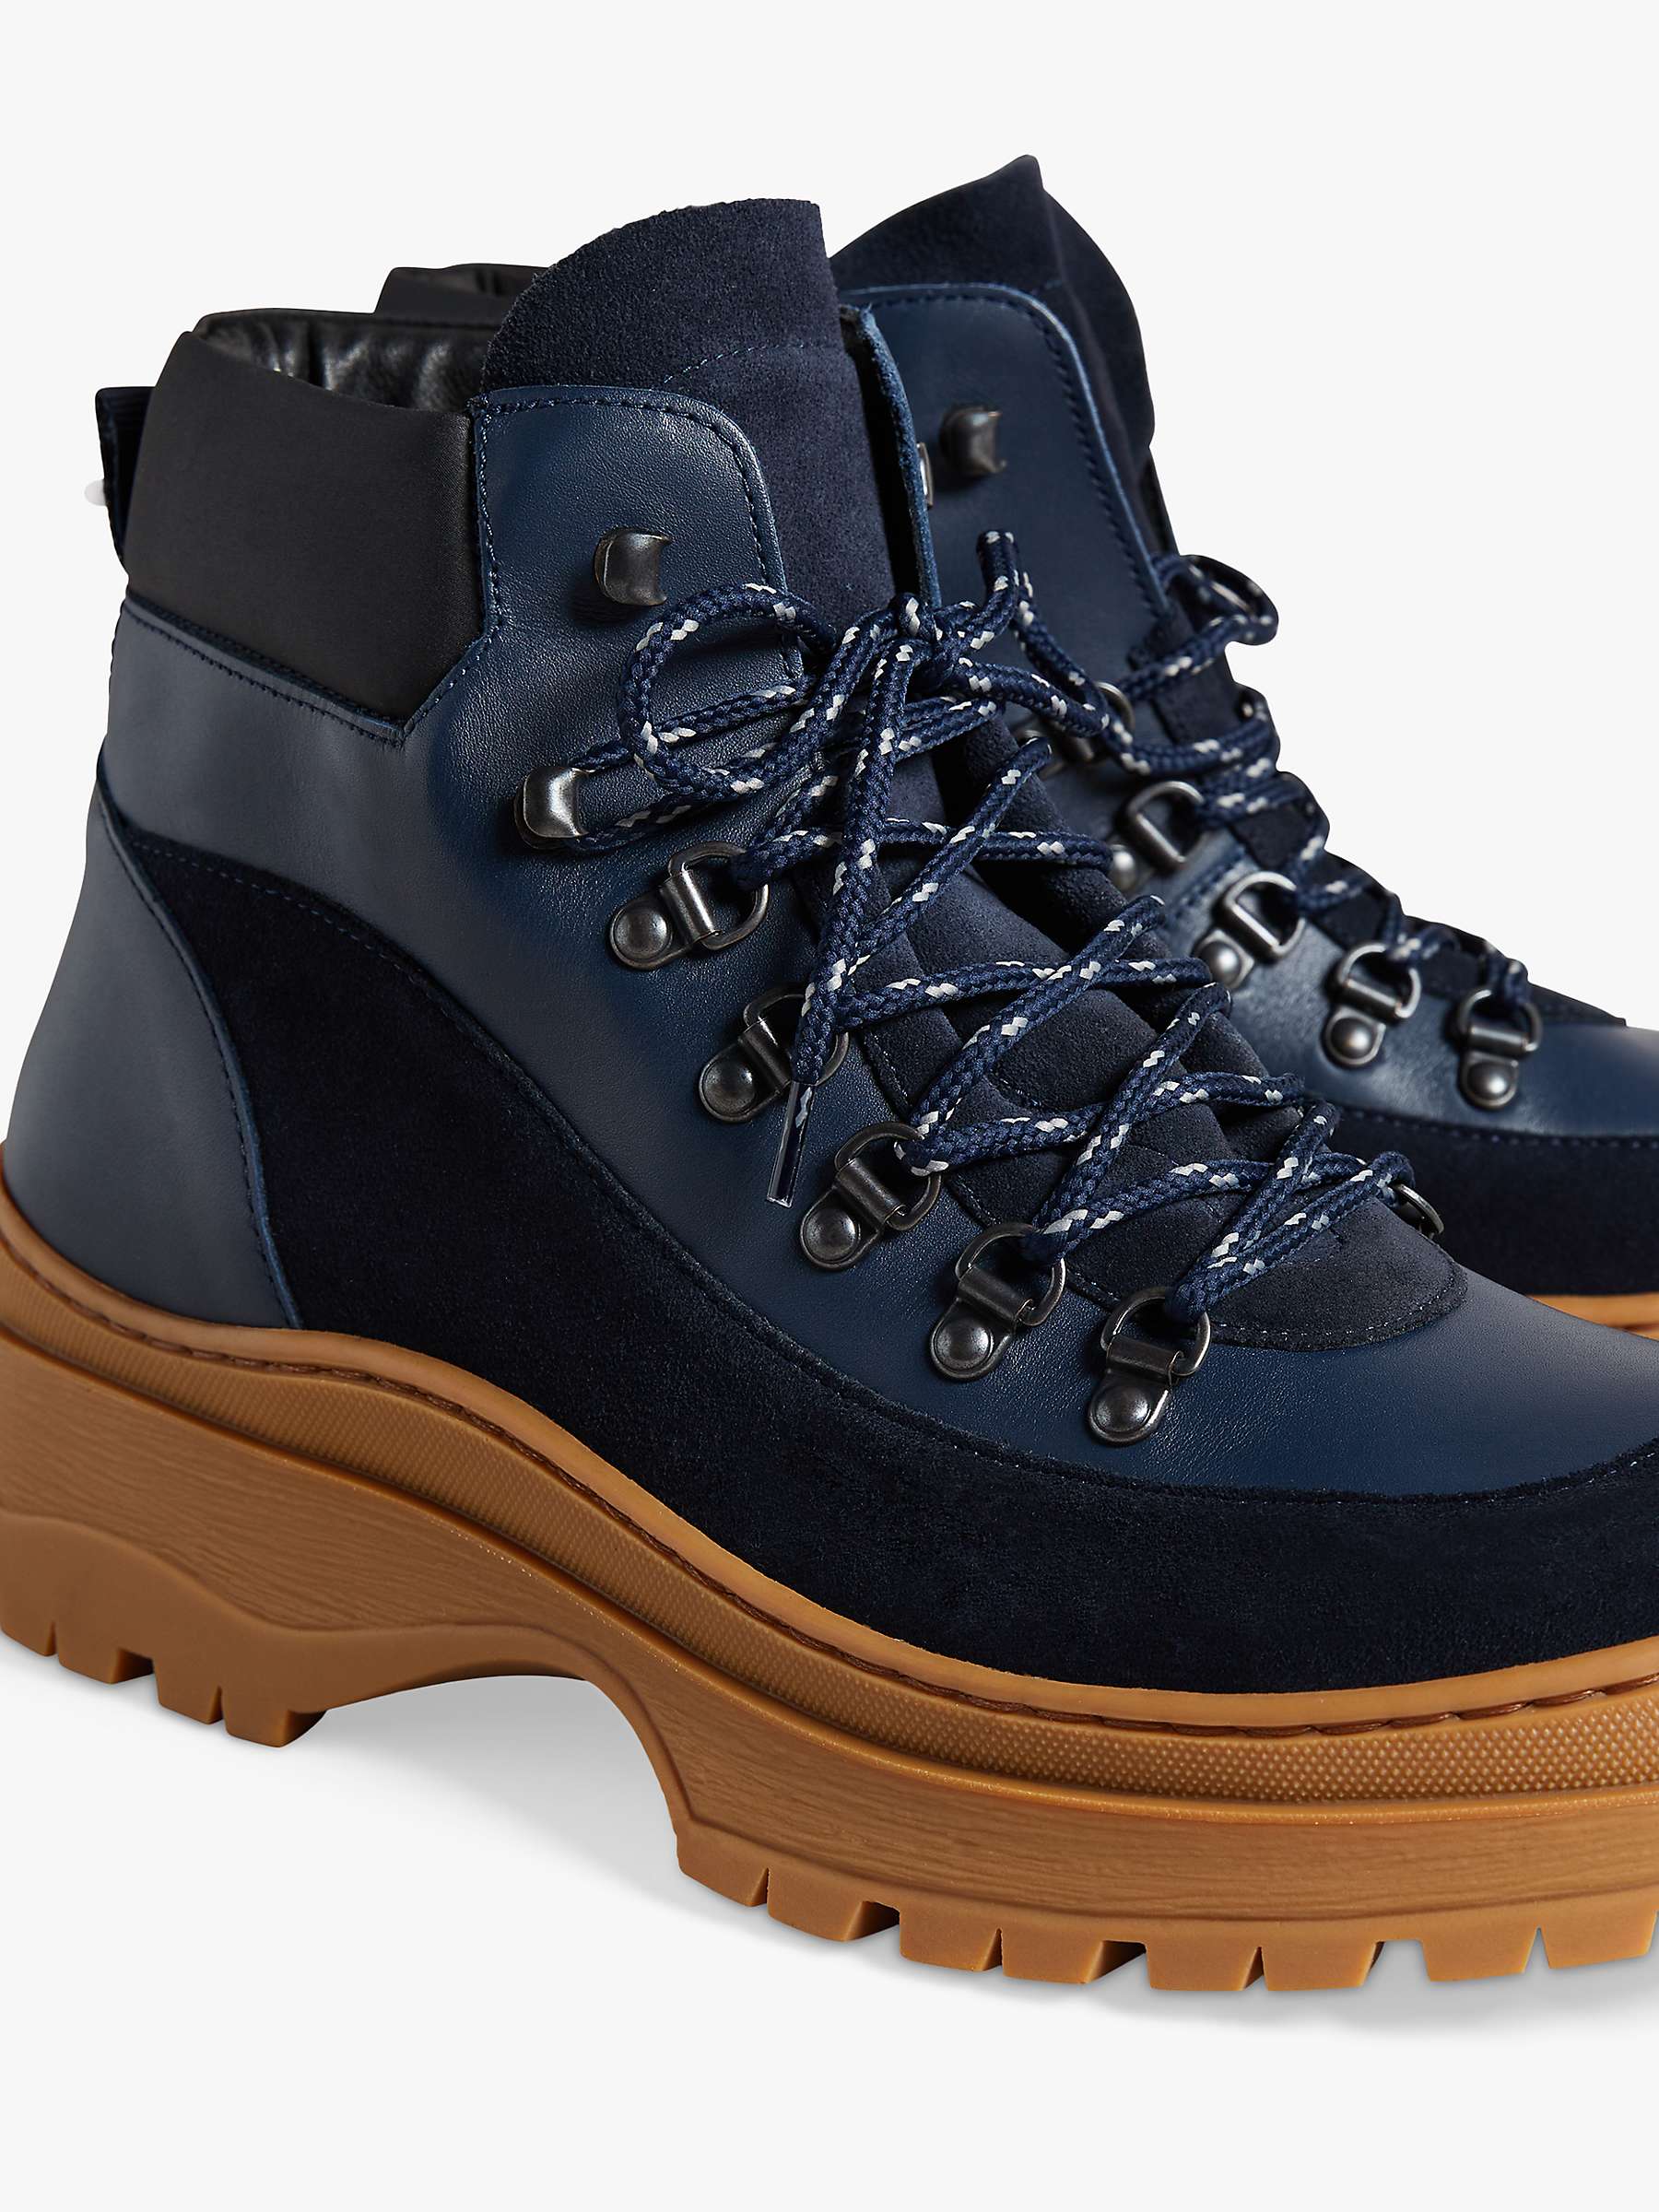 Ted Baker Westonn Leather Lace-Up Boots, Navy at John Lewis & Partners